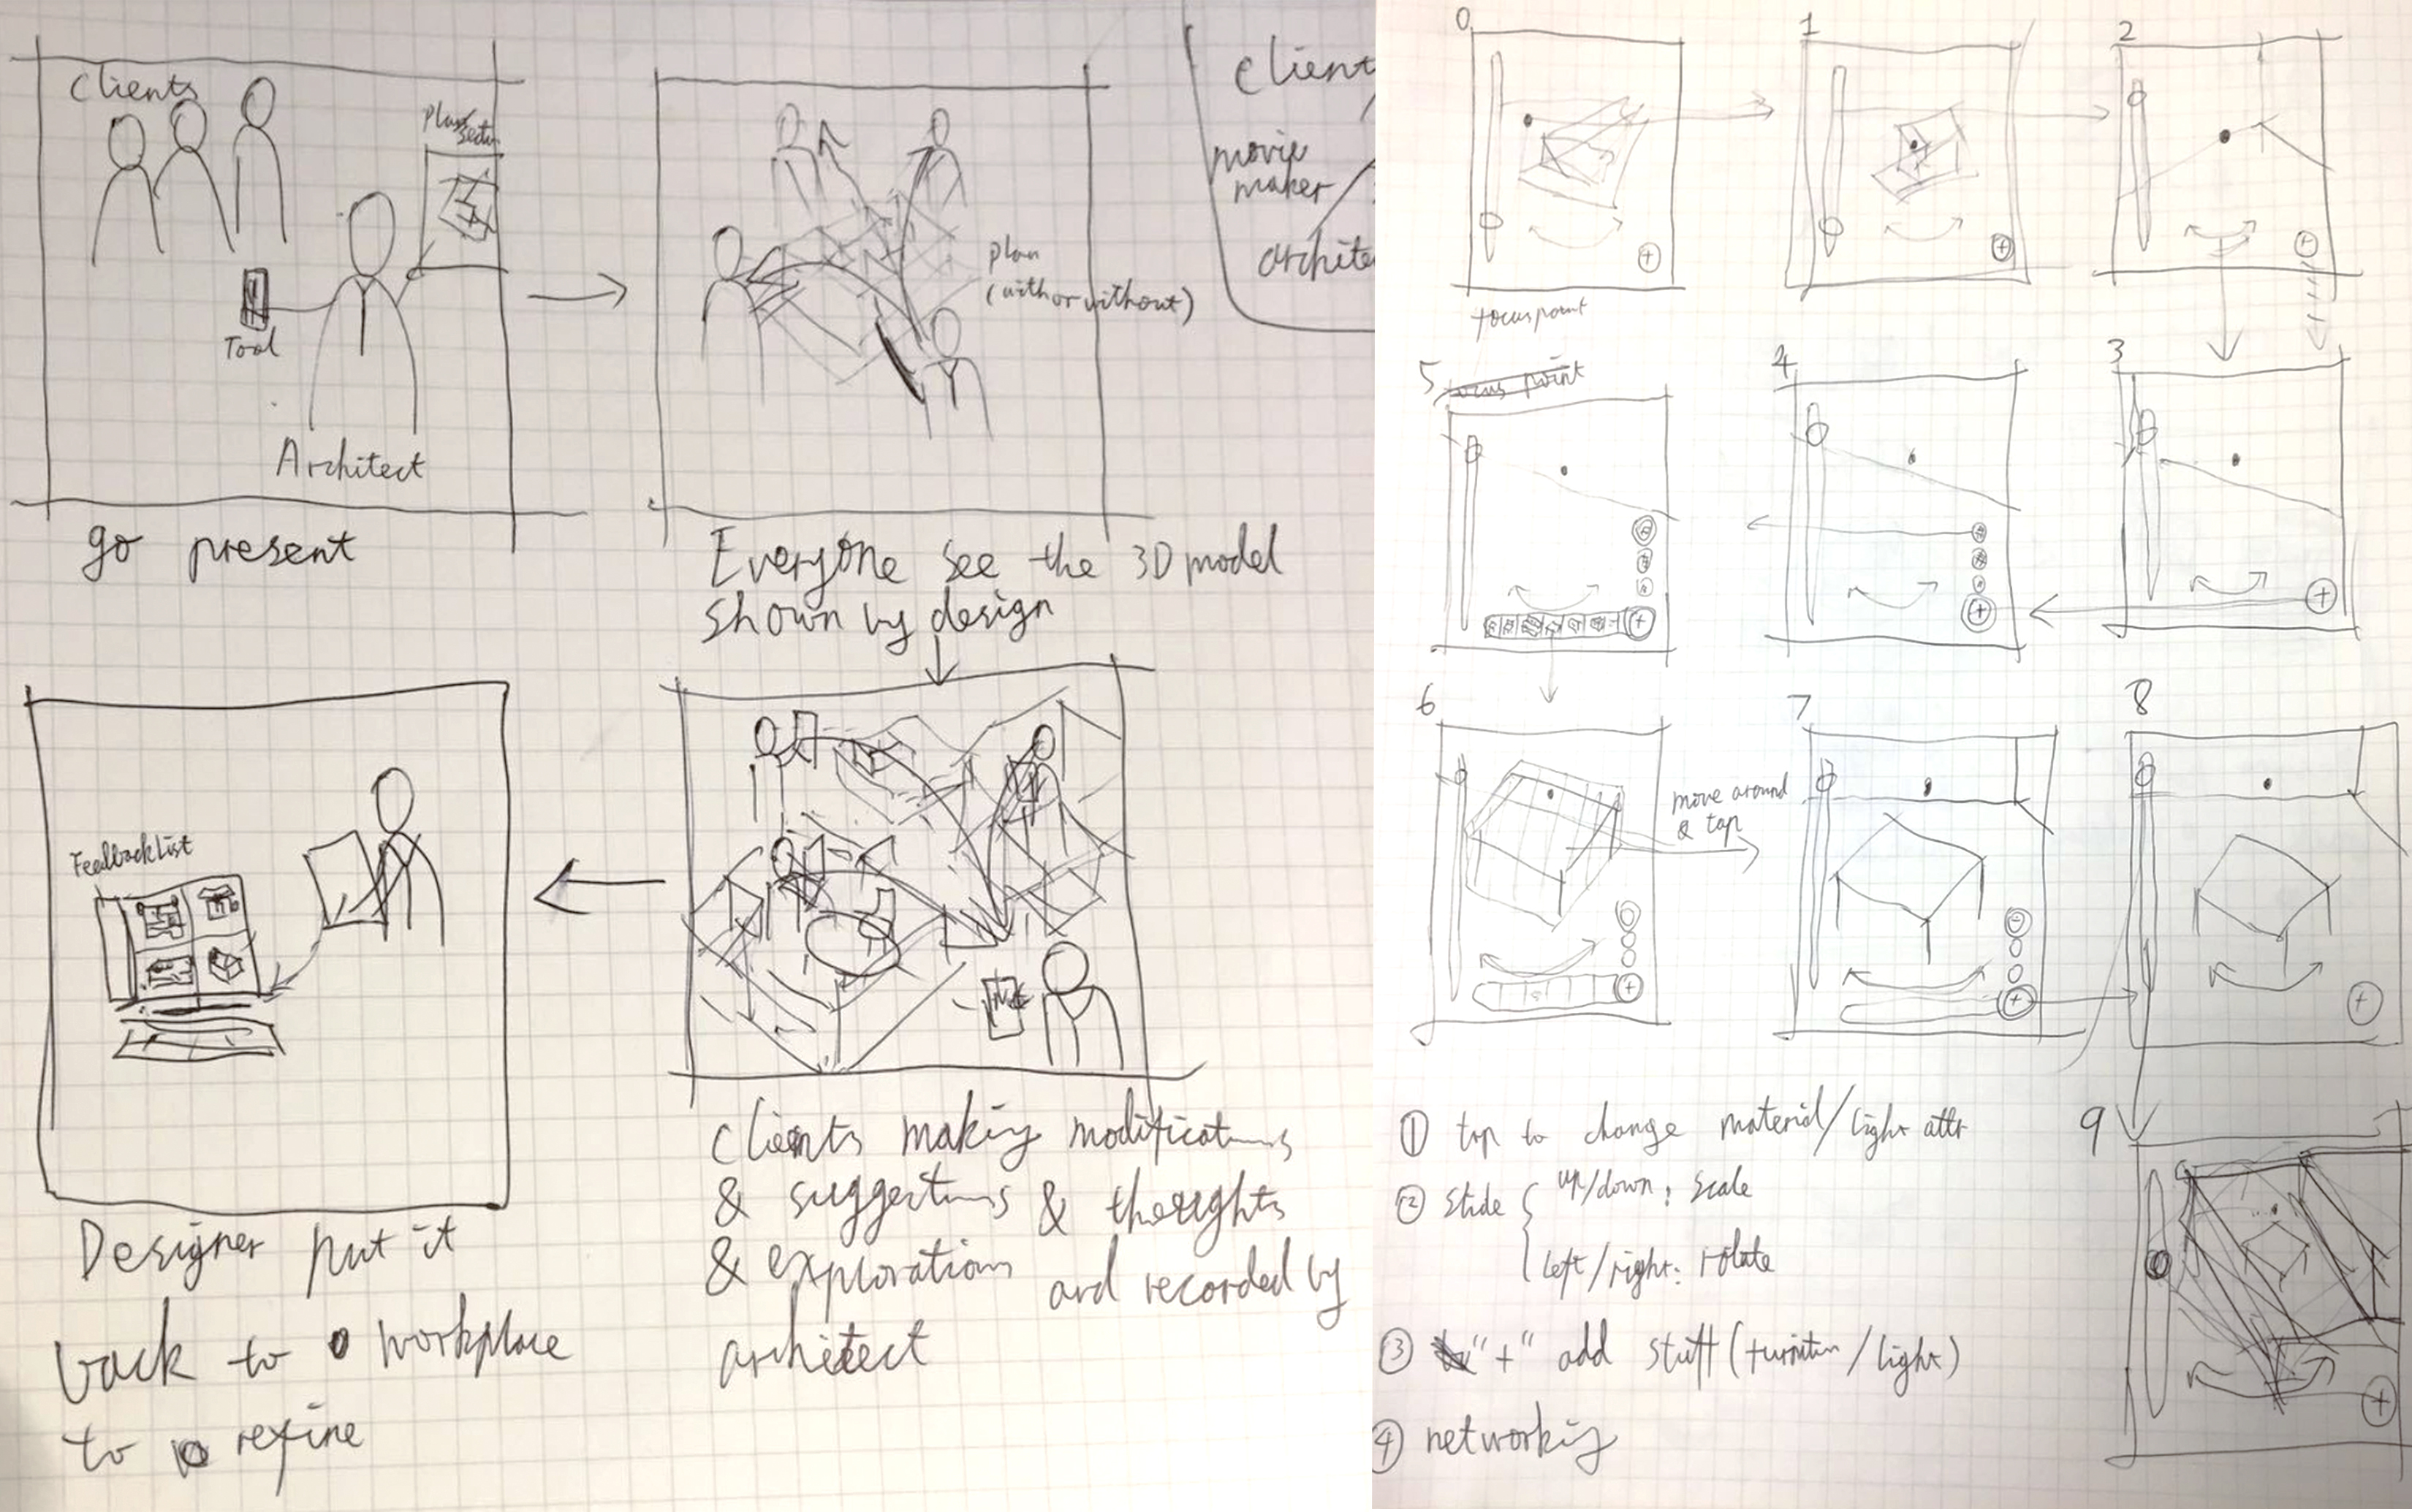 Ideation drafts about ArchiShow